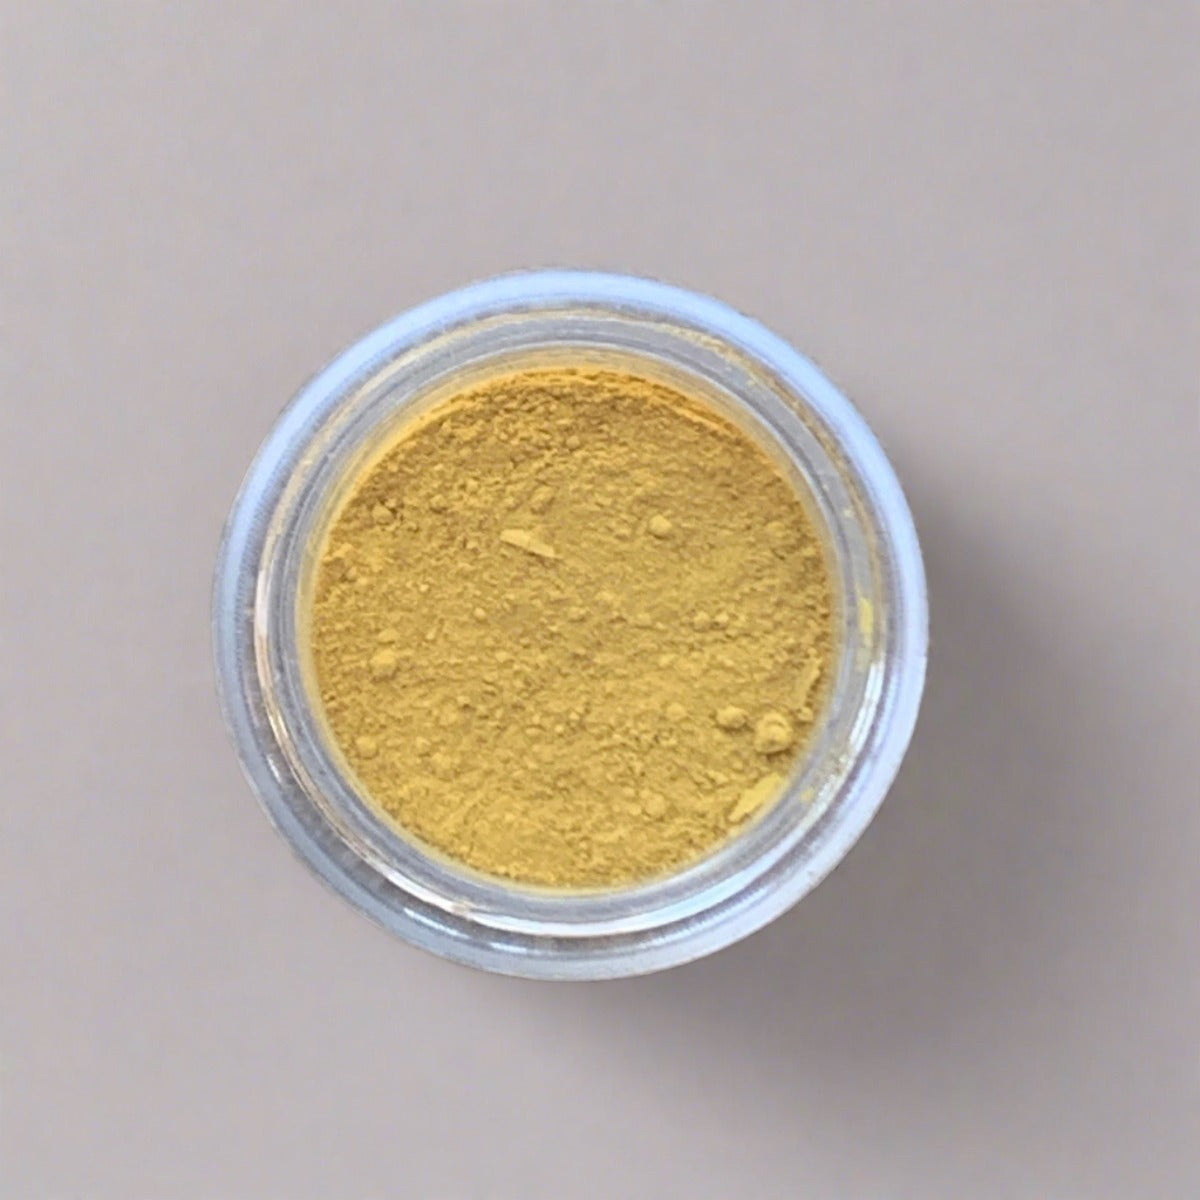 Cosmetic jar of light yellow eyeshadow loose powder, displaying its color and texture